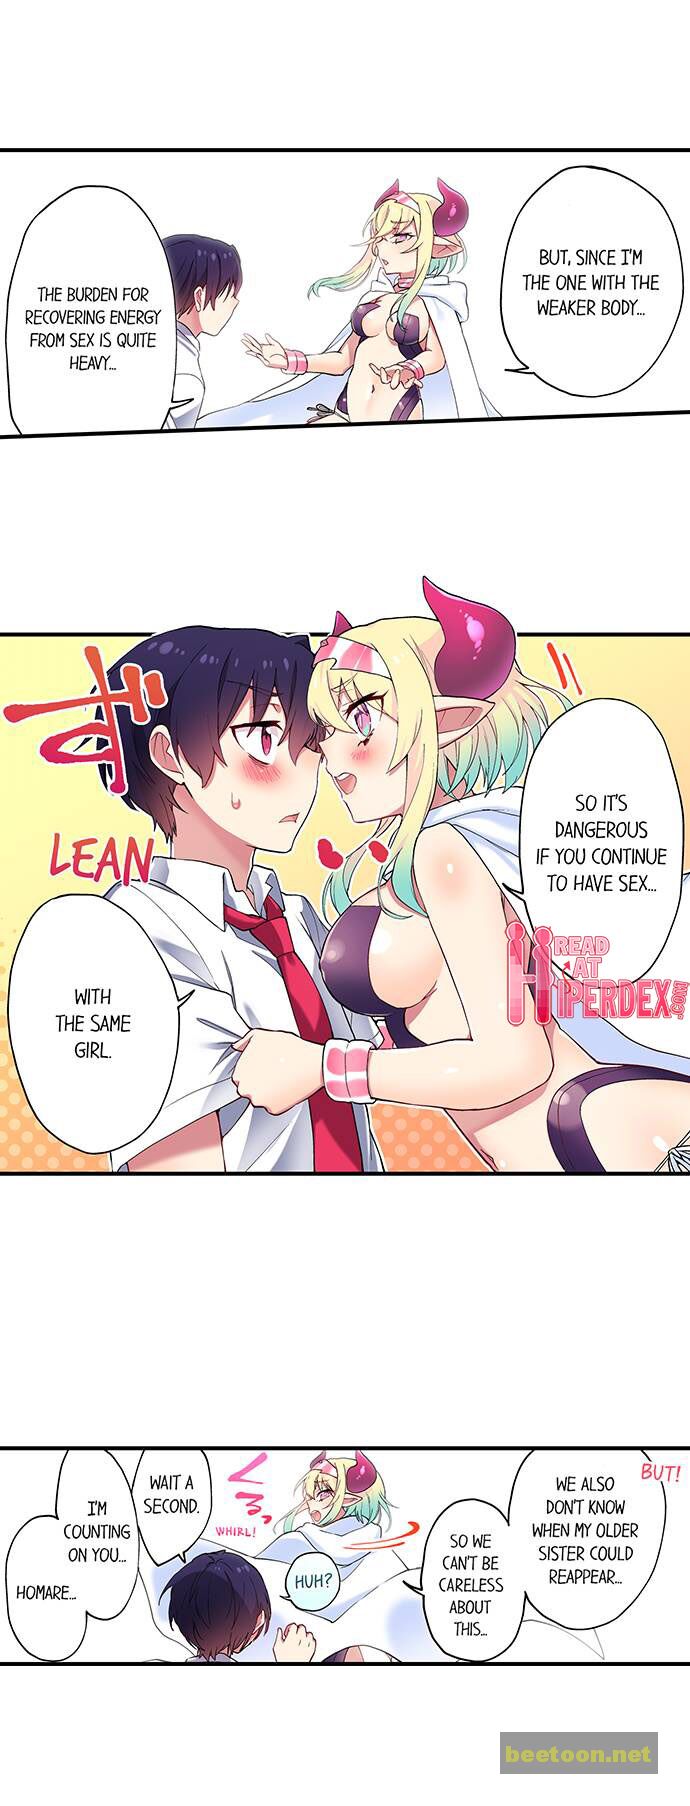 I Can See The Number Of Times People Orgasm Chapter 106 - ManhwaFull.net